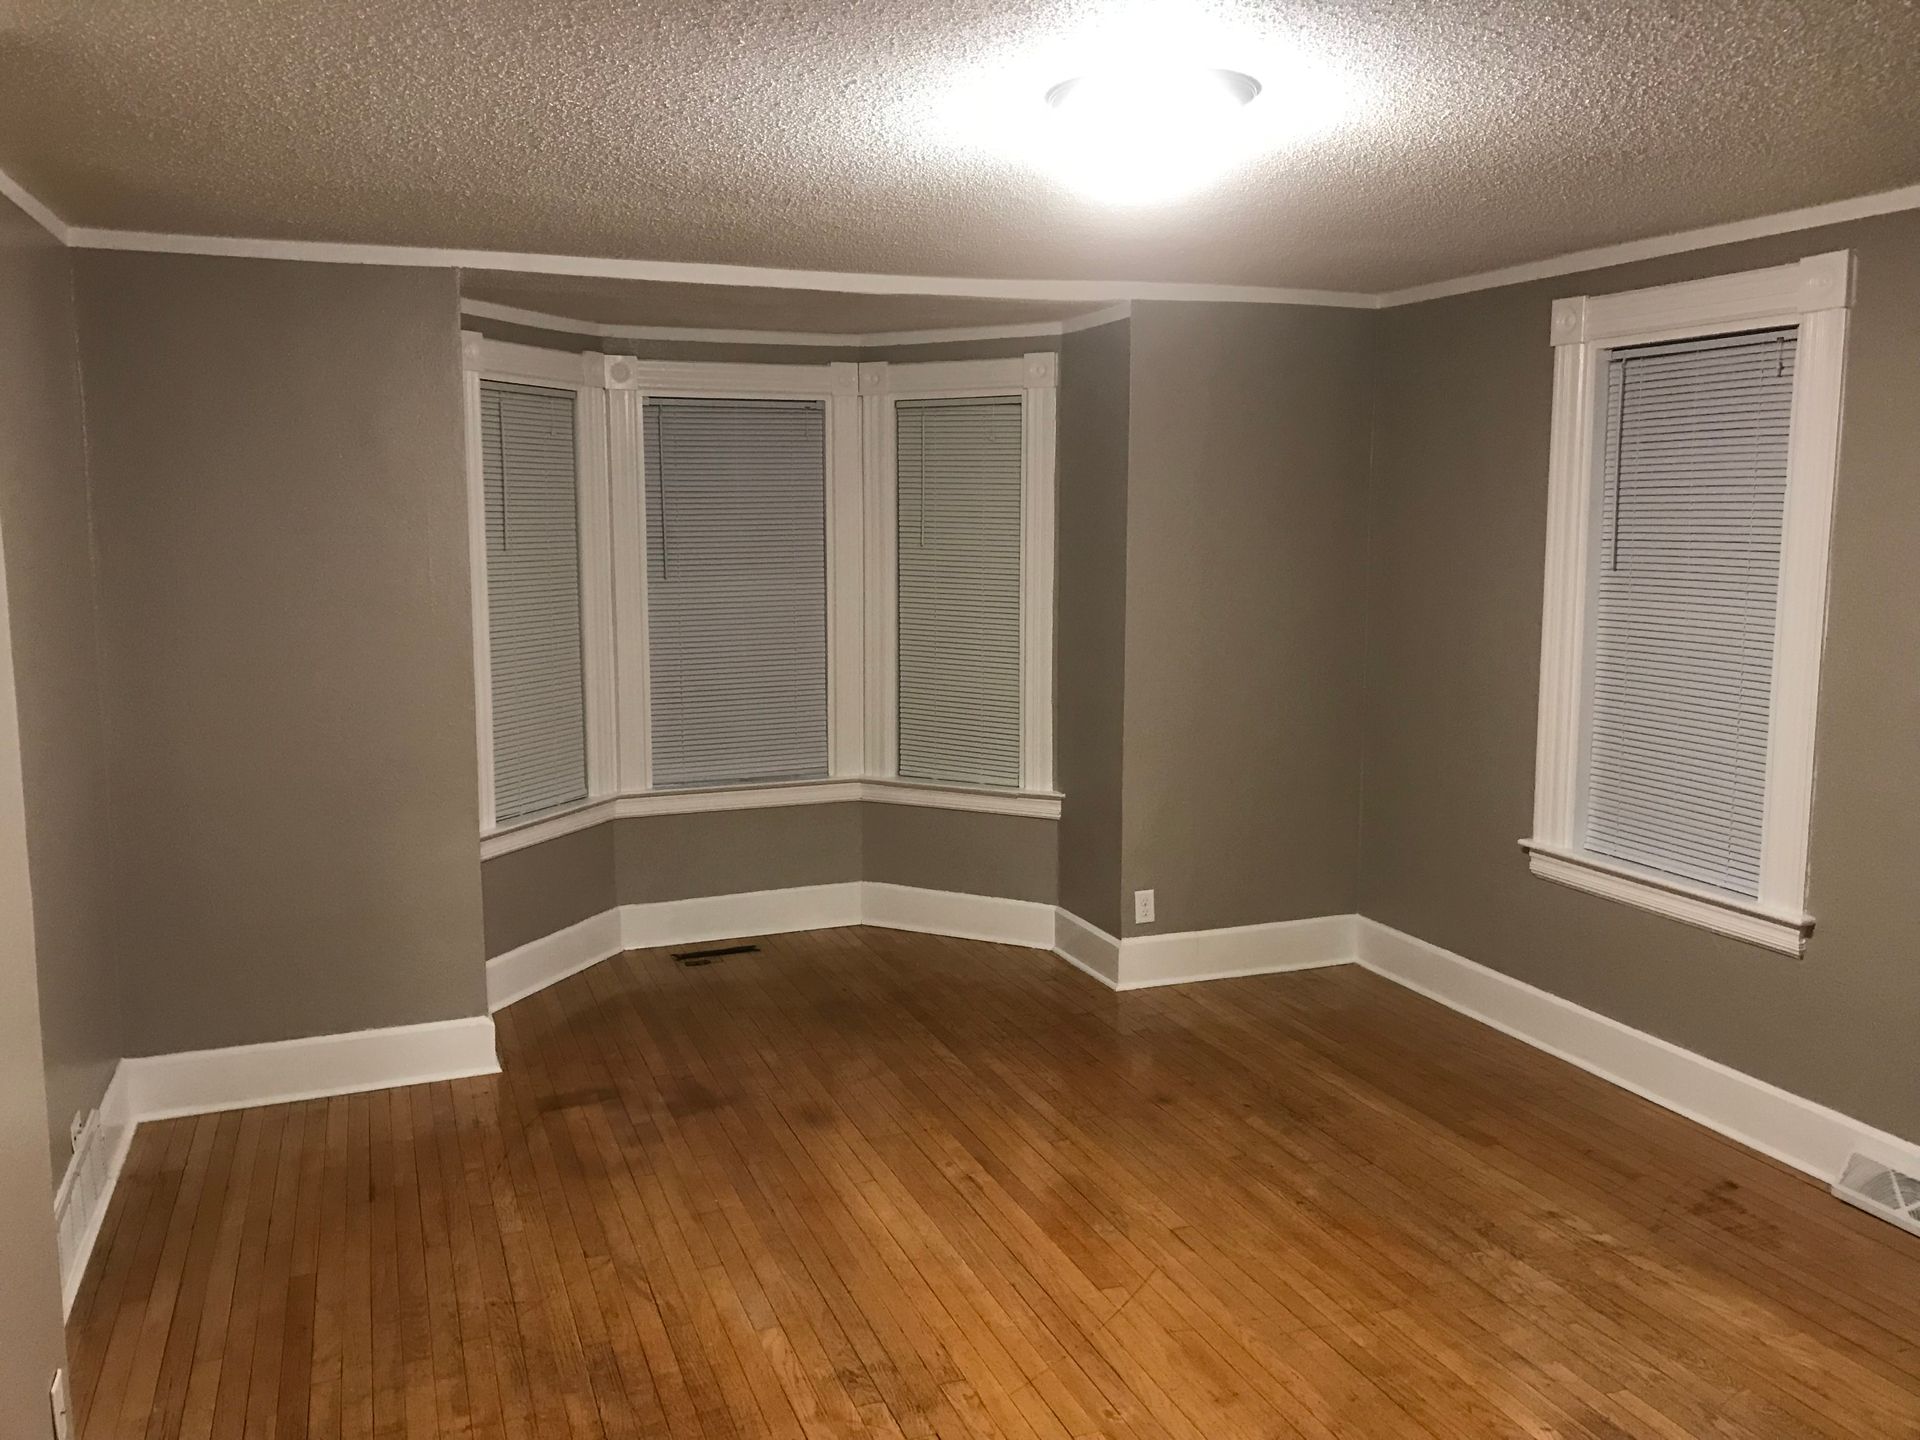 An empty living room with a bay window and hardwood floors.